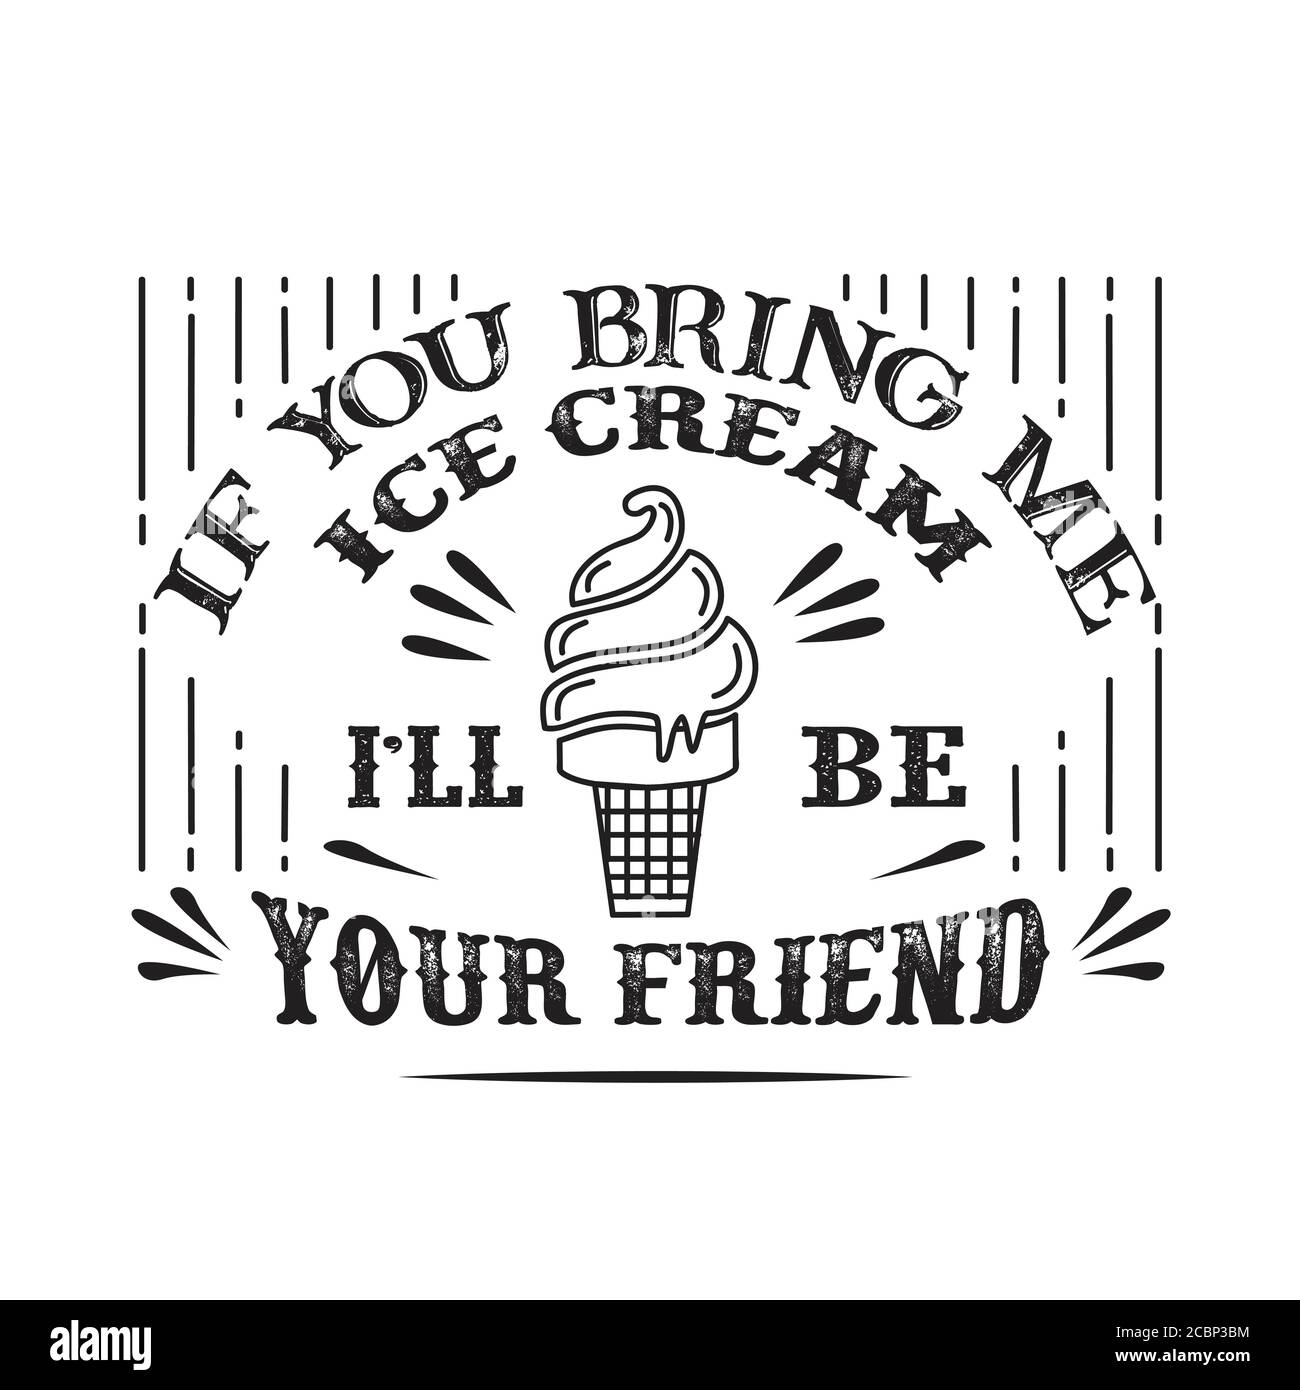 Food and drink Quote good for cricut. If you bring me ice cream I ll be your friend Stock Vector